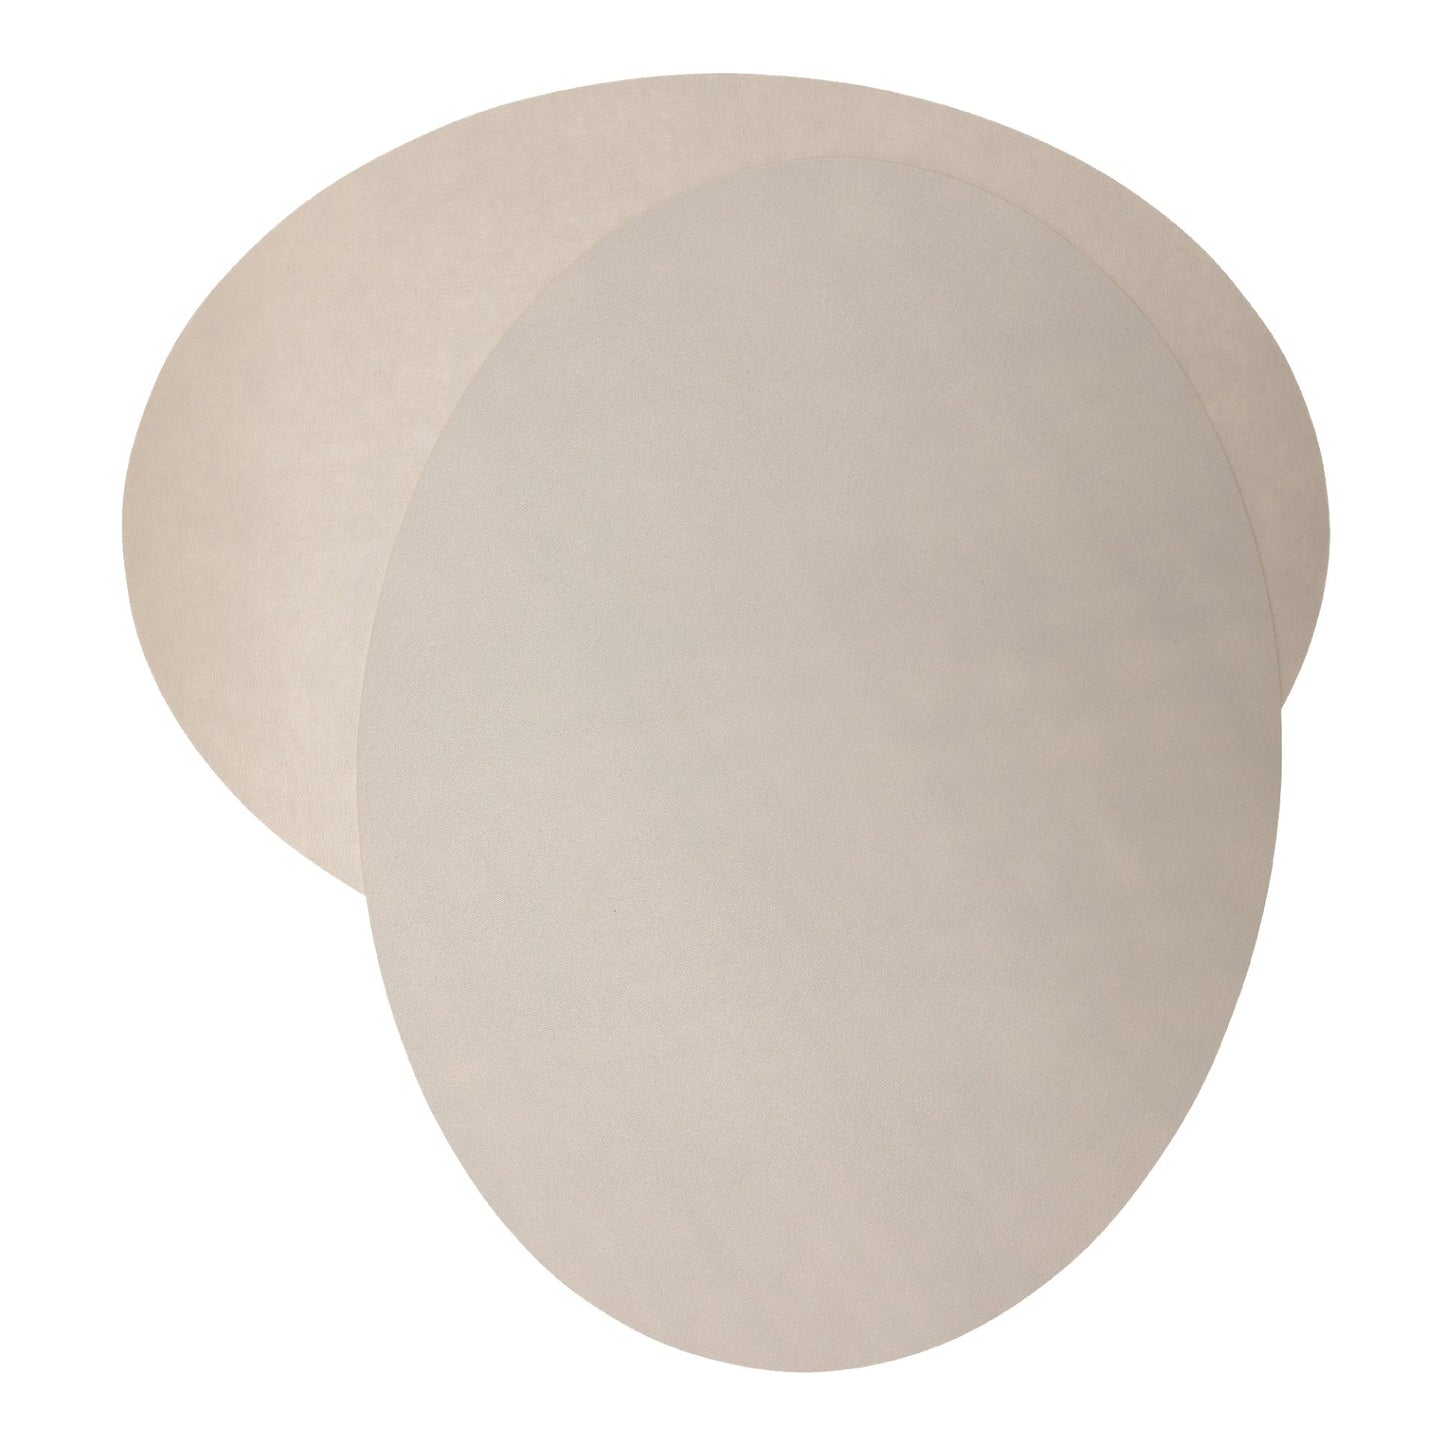 Two oval washable paper placemats are shown on top of each other, at contrasting angles. The one in the rear is beige and the one on top is pale grey.